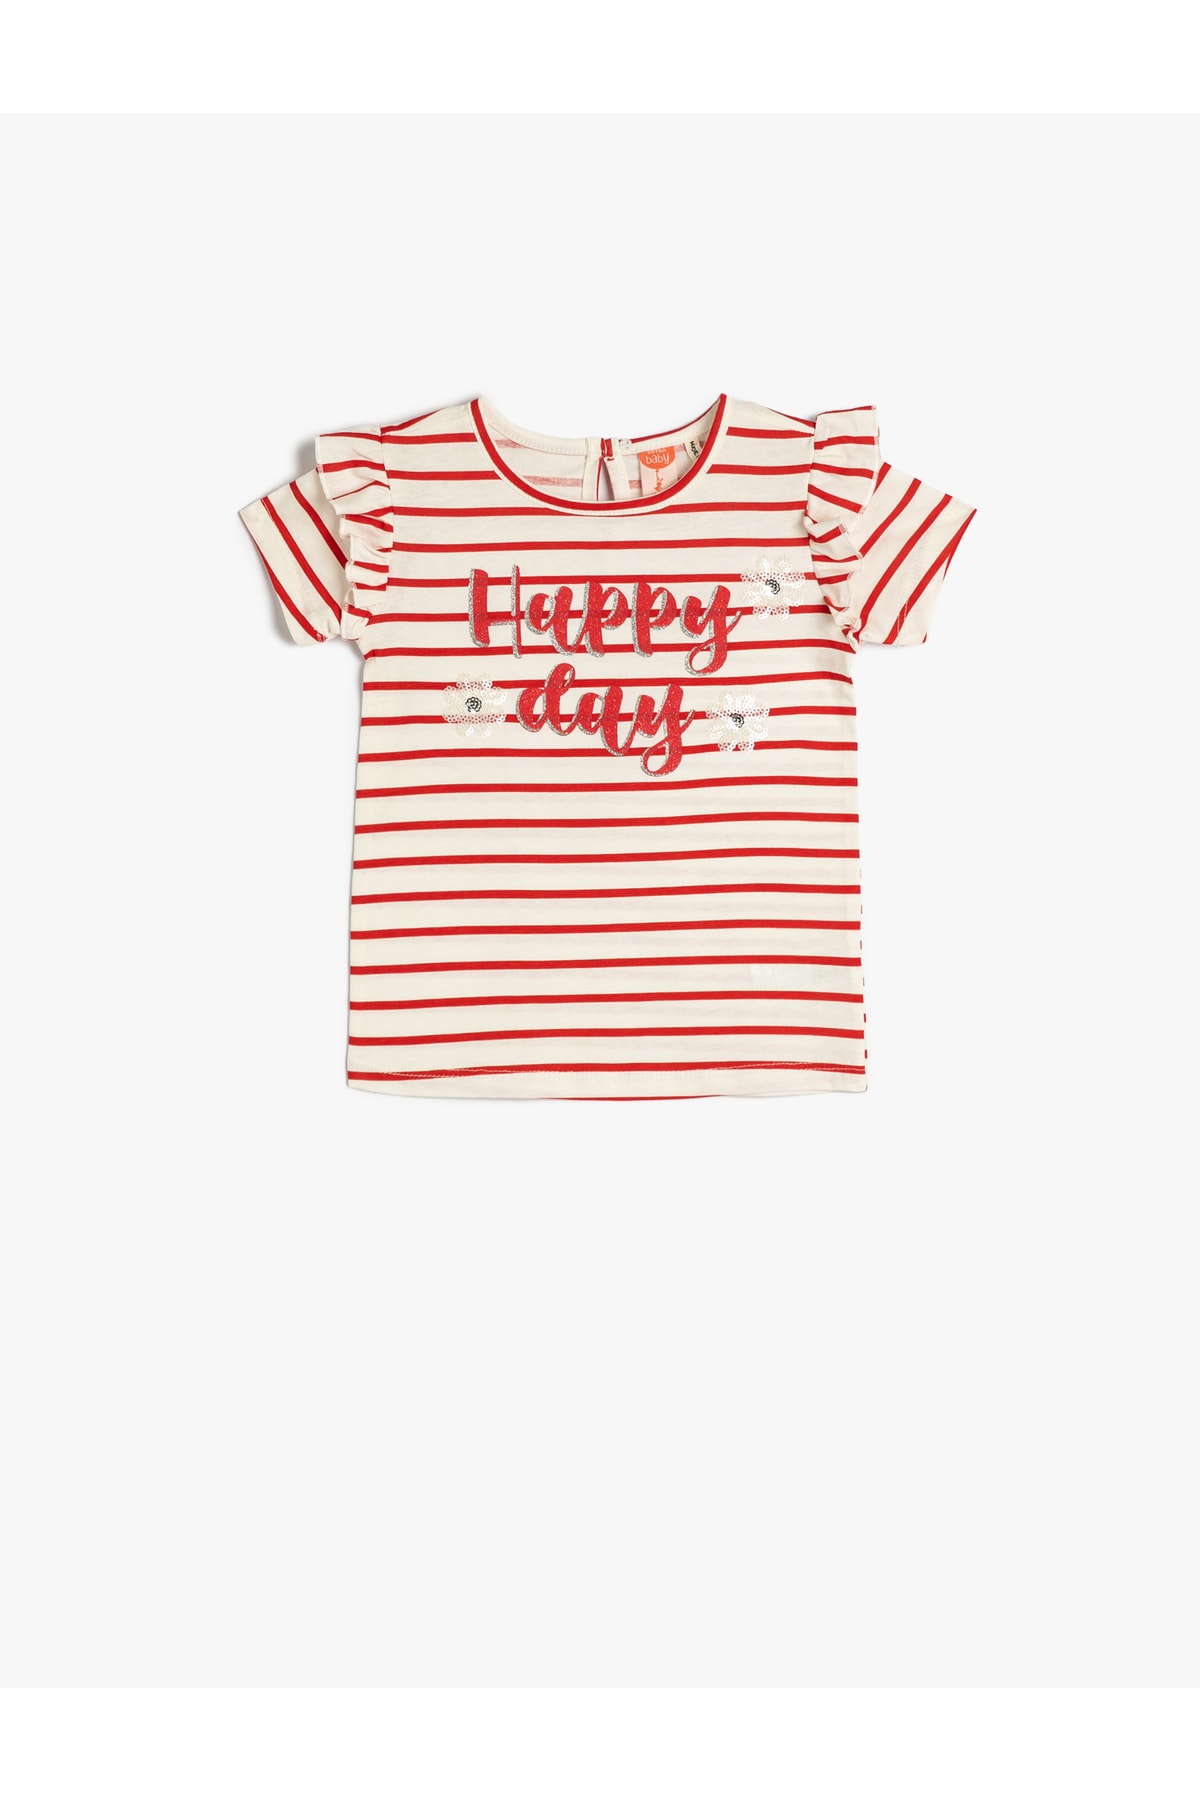 Levně Koton Striped T-Shirt Short Sleeve Cotton T-Shirt With Ruffle Sequins Embroidered